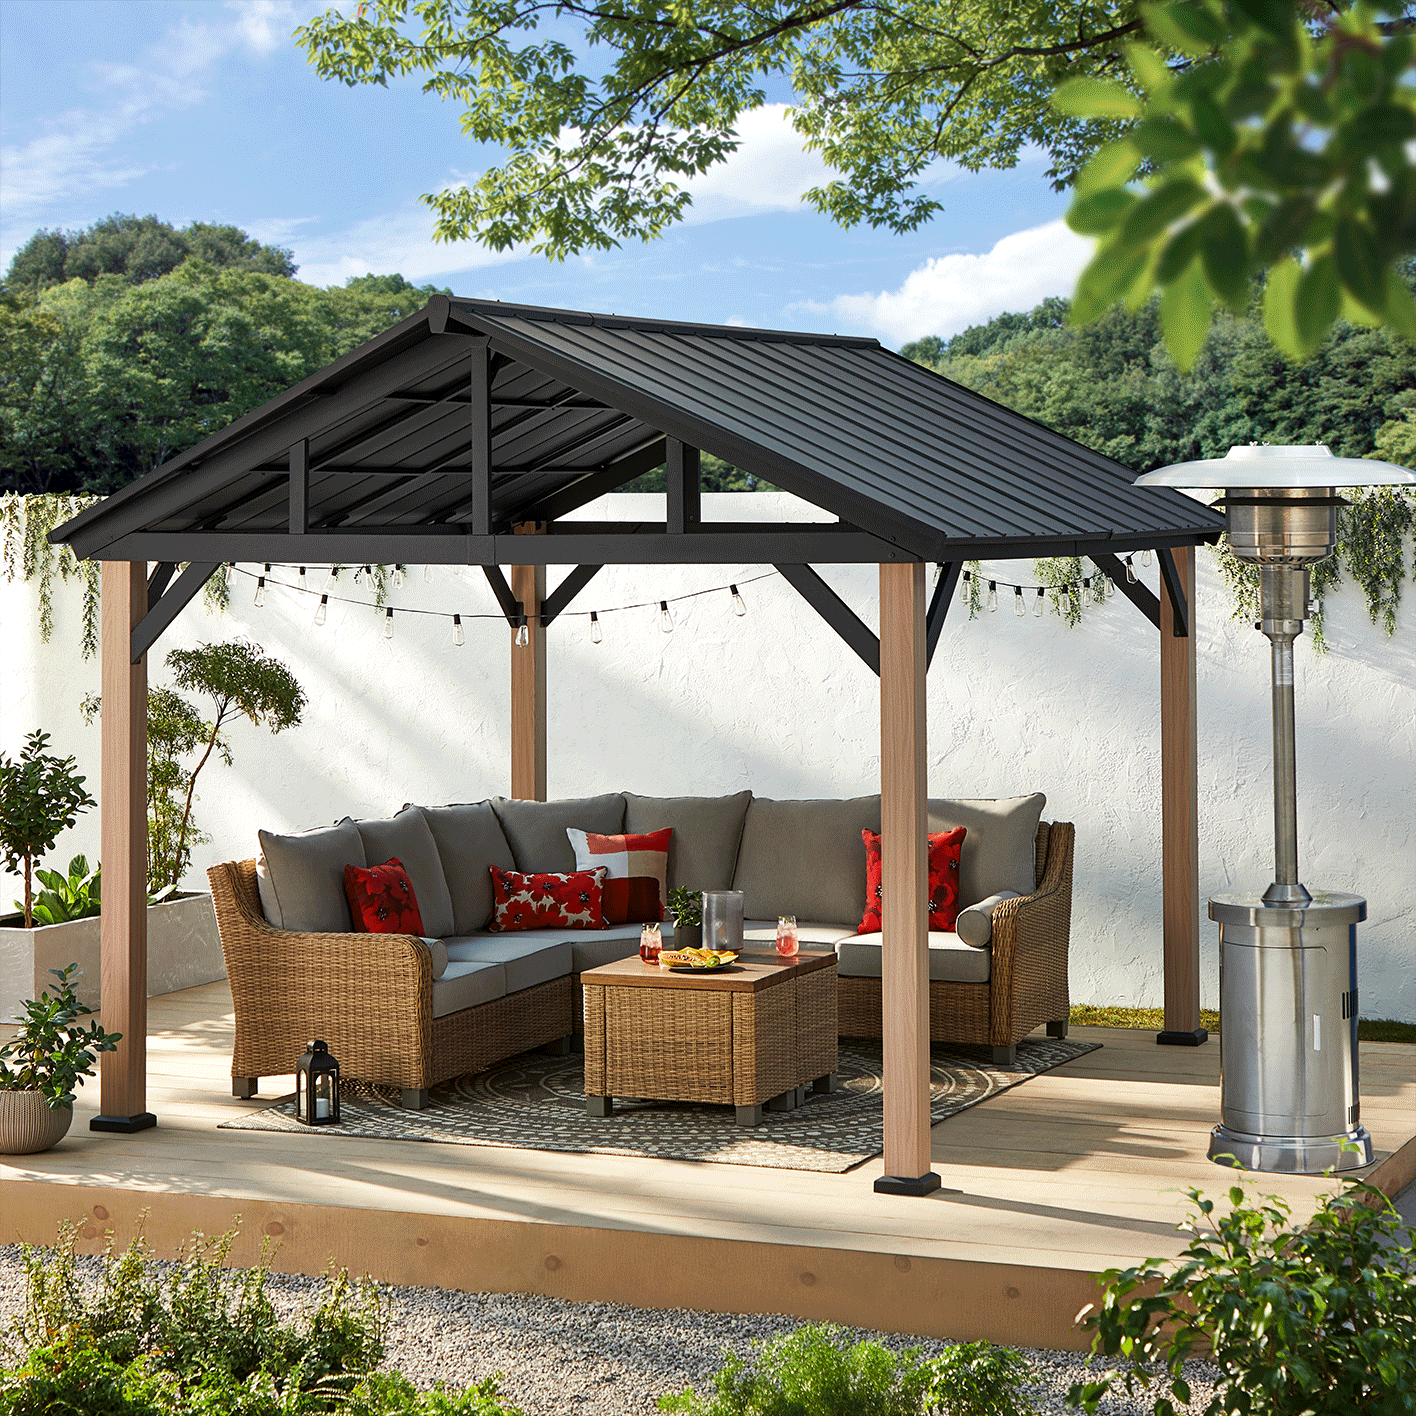 CANVAS Homestead Gazebo set up on wooden backyard porch with outdoor heater and sectional set. 